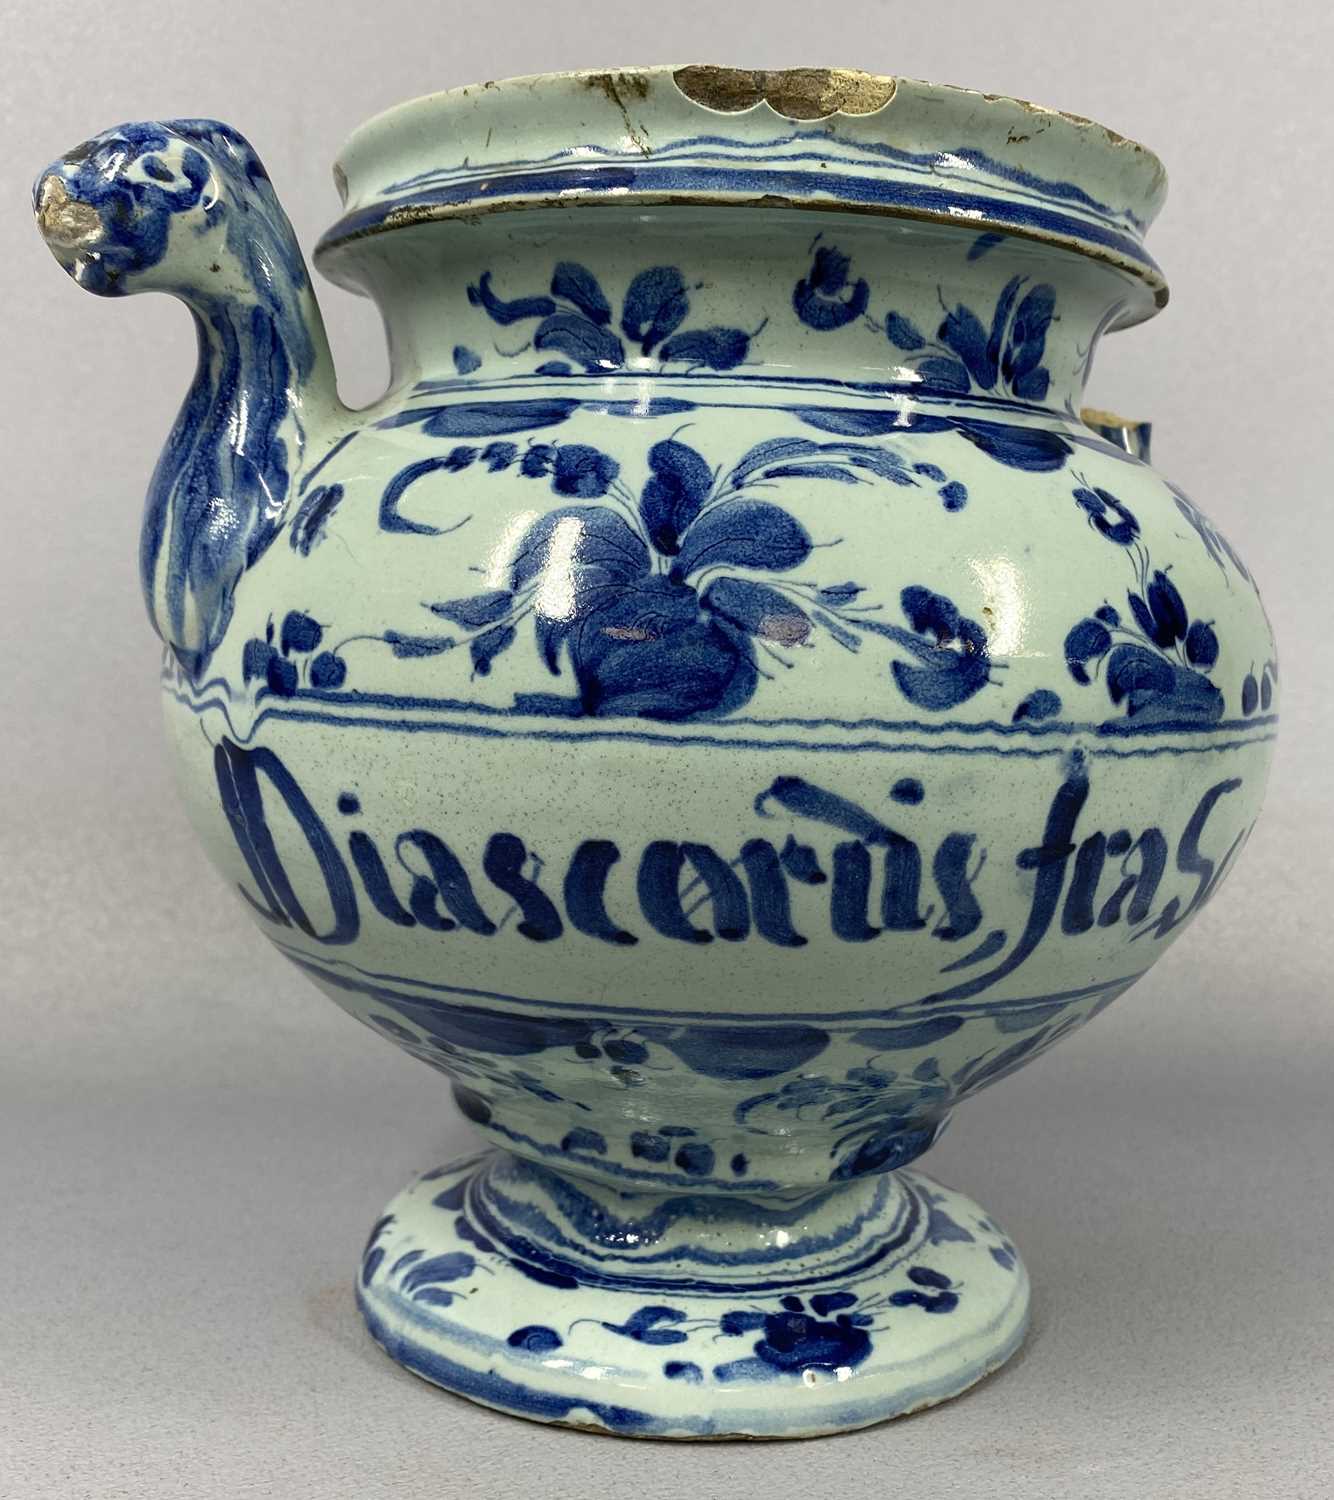 GROUP OF MIXED CERAMICS, including Italian Majolica apothecary jar in 17th century style lettered - Image 3 of 5